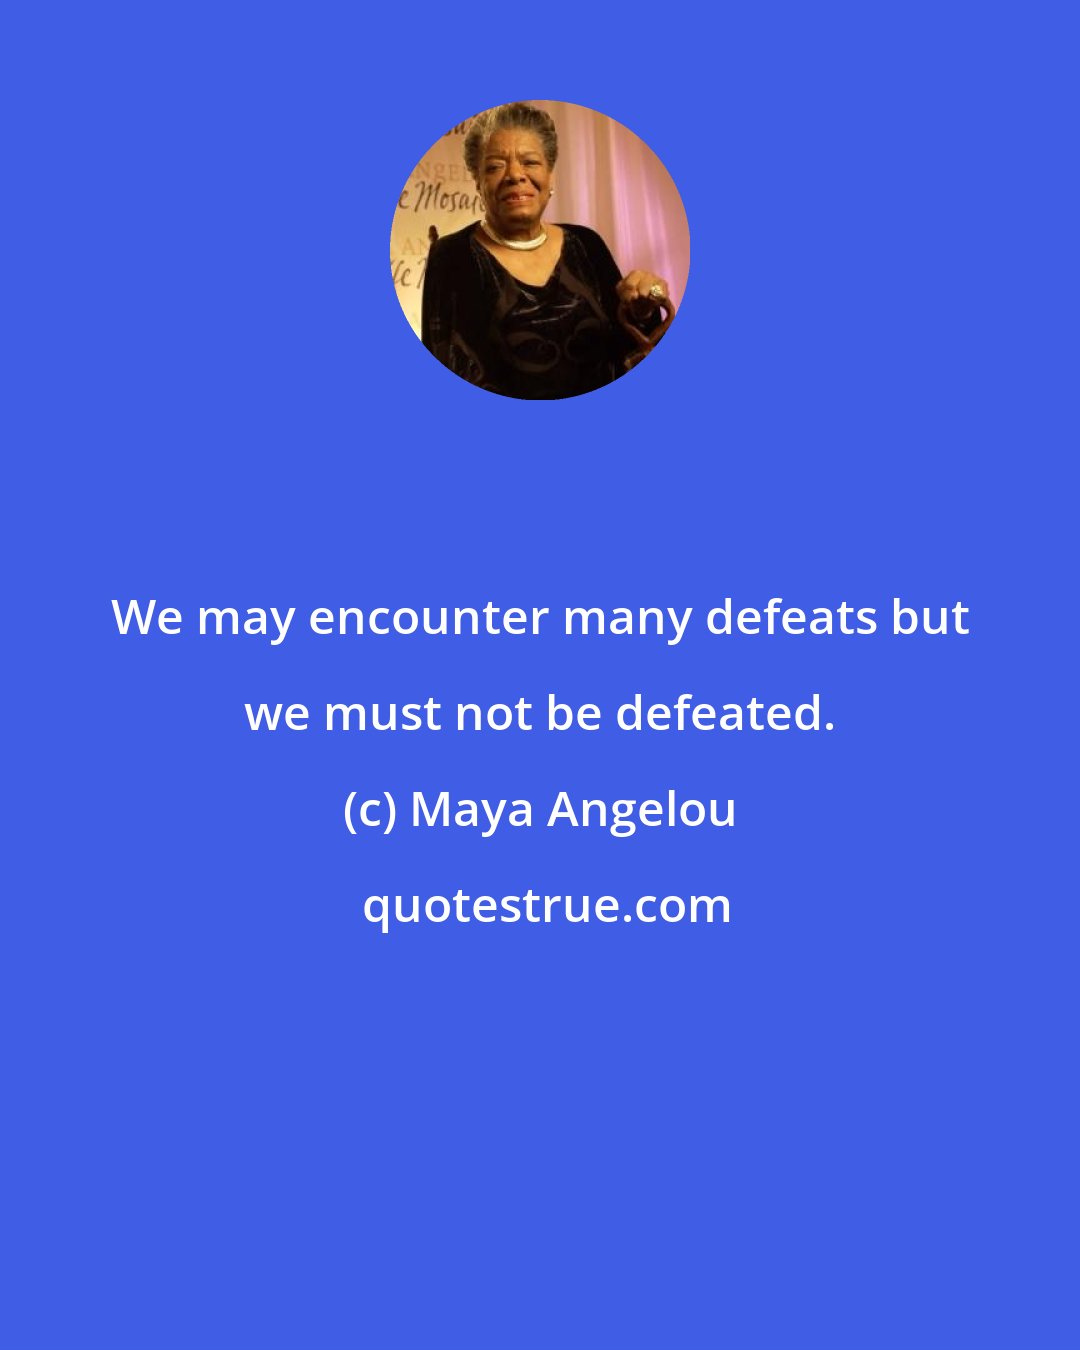 Maya Angelou: We may encounter many defeats but we must not be defeated.